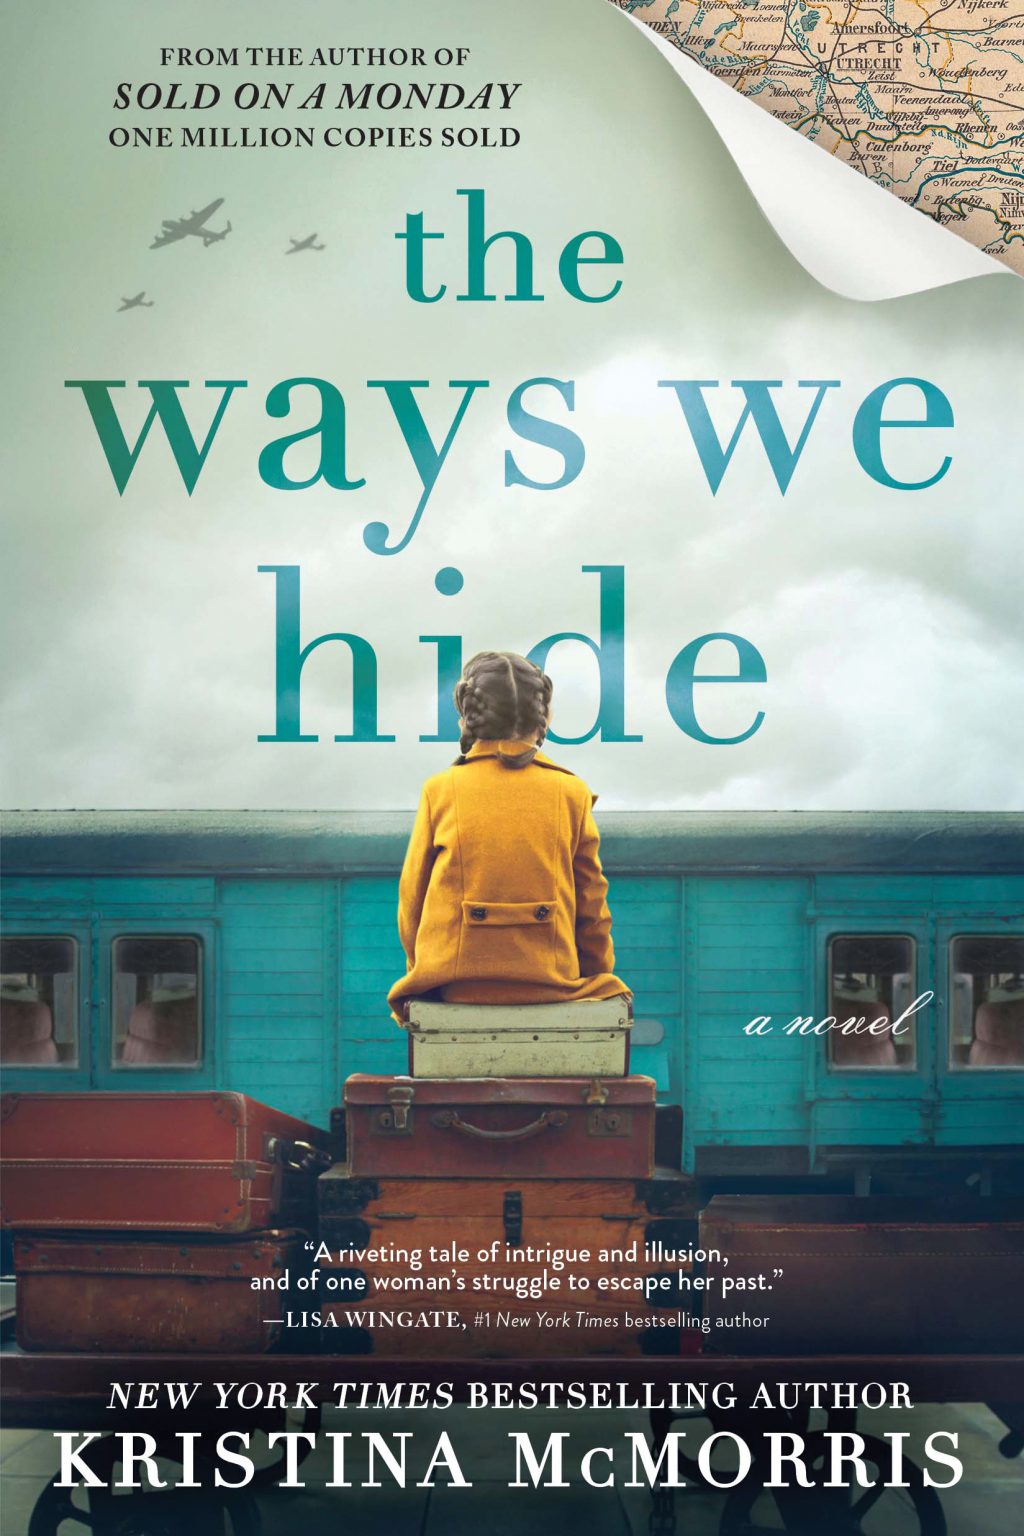 One of our recommended books is The Ways We Hide by Kristina McMorris